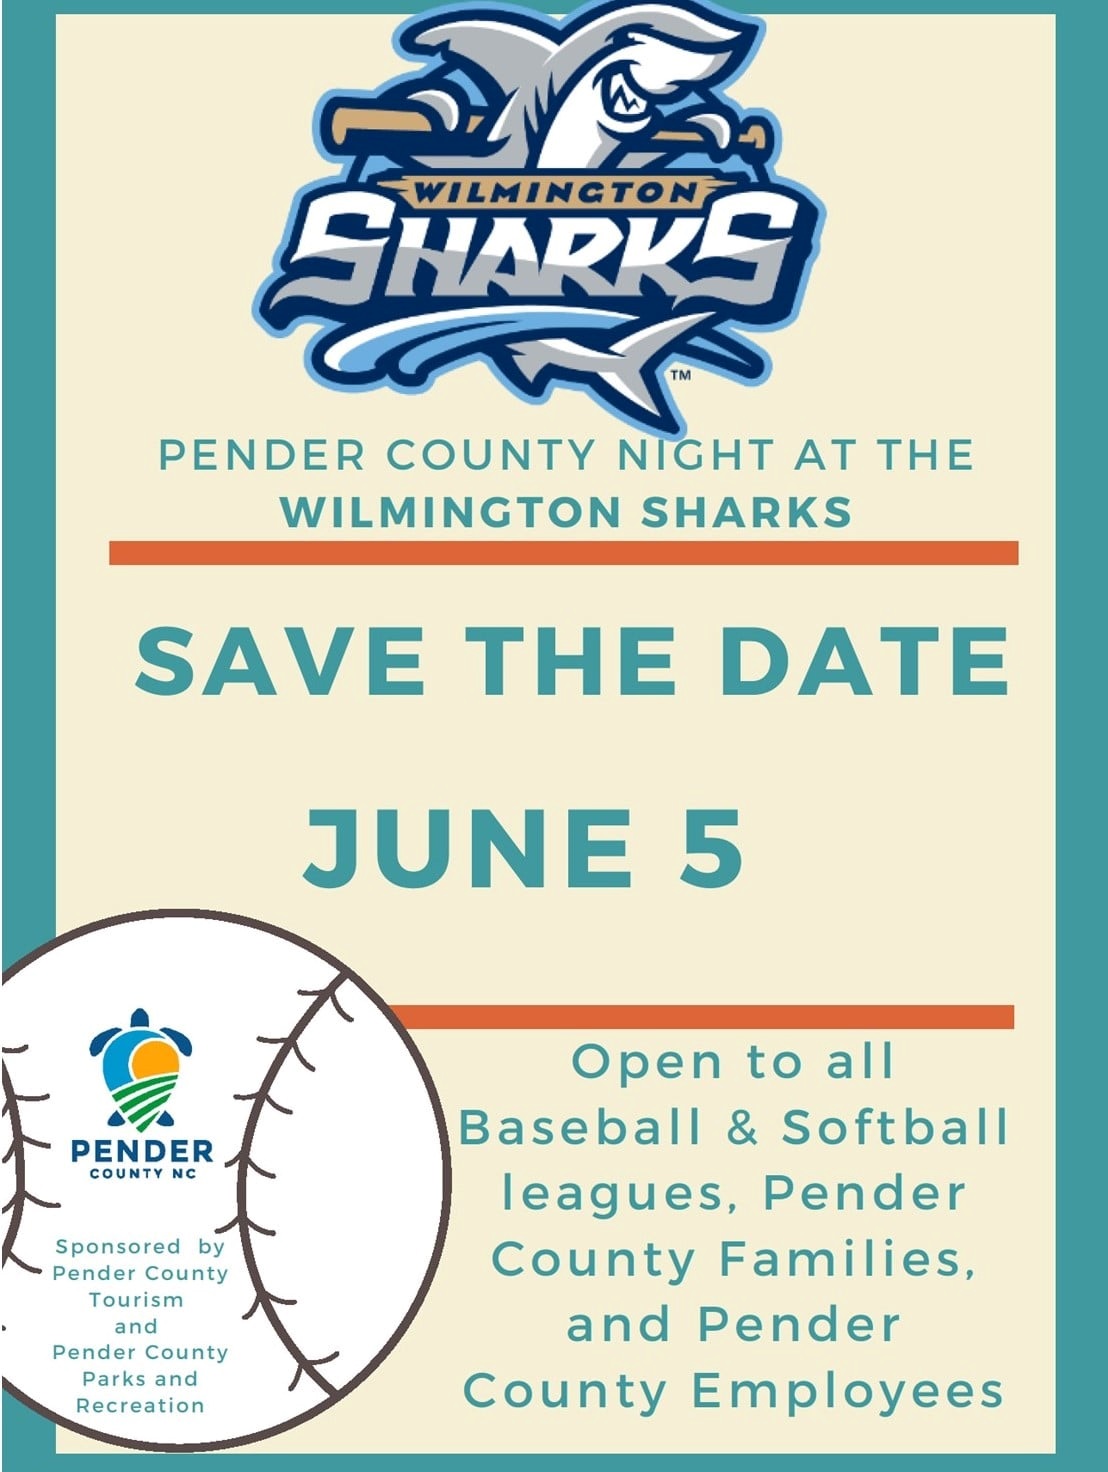 Pender County Night with the Wilmington Sharks